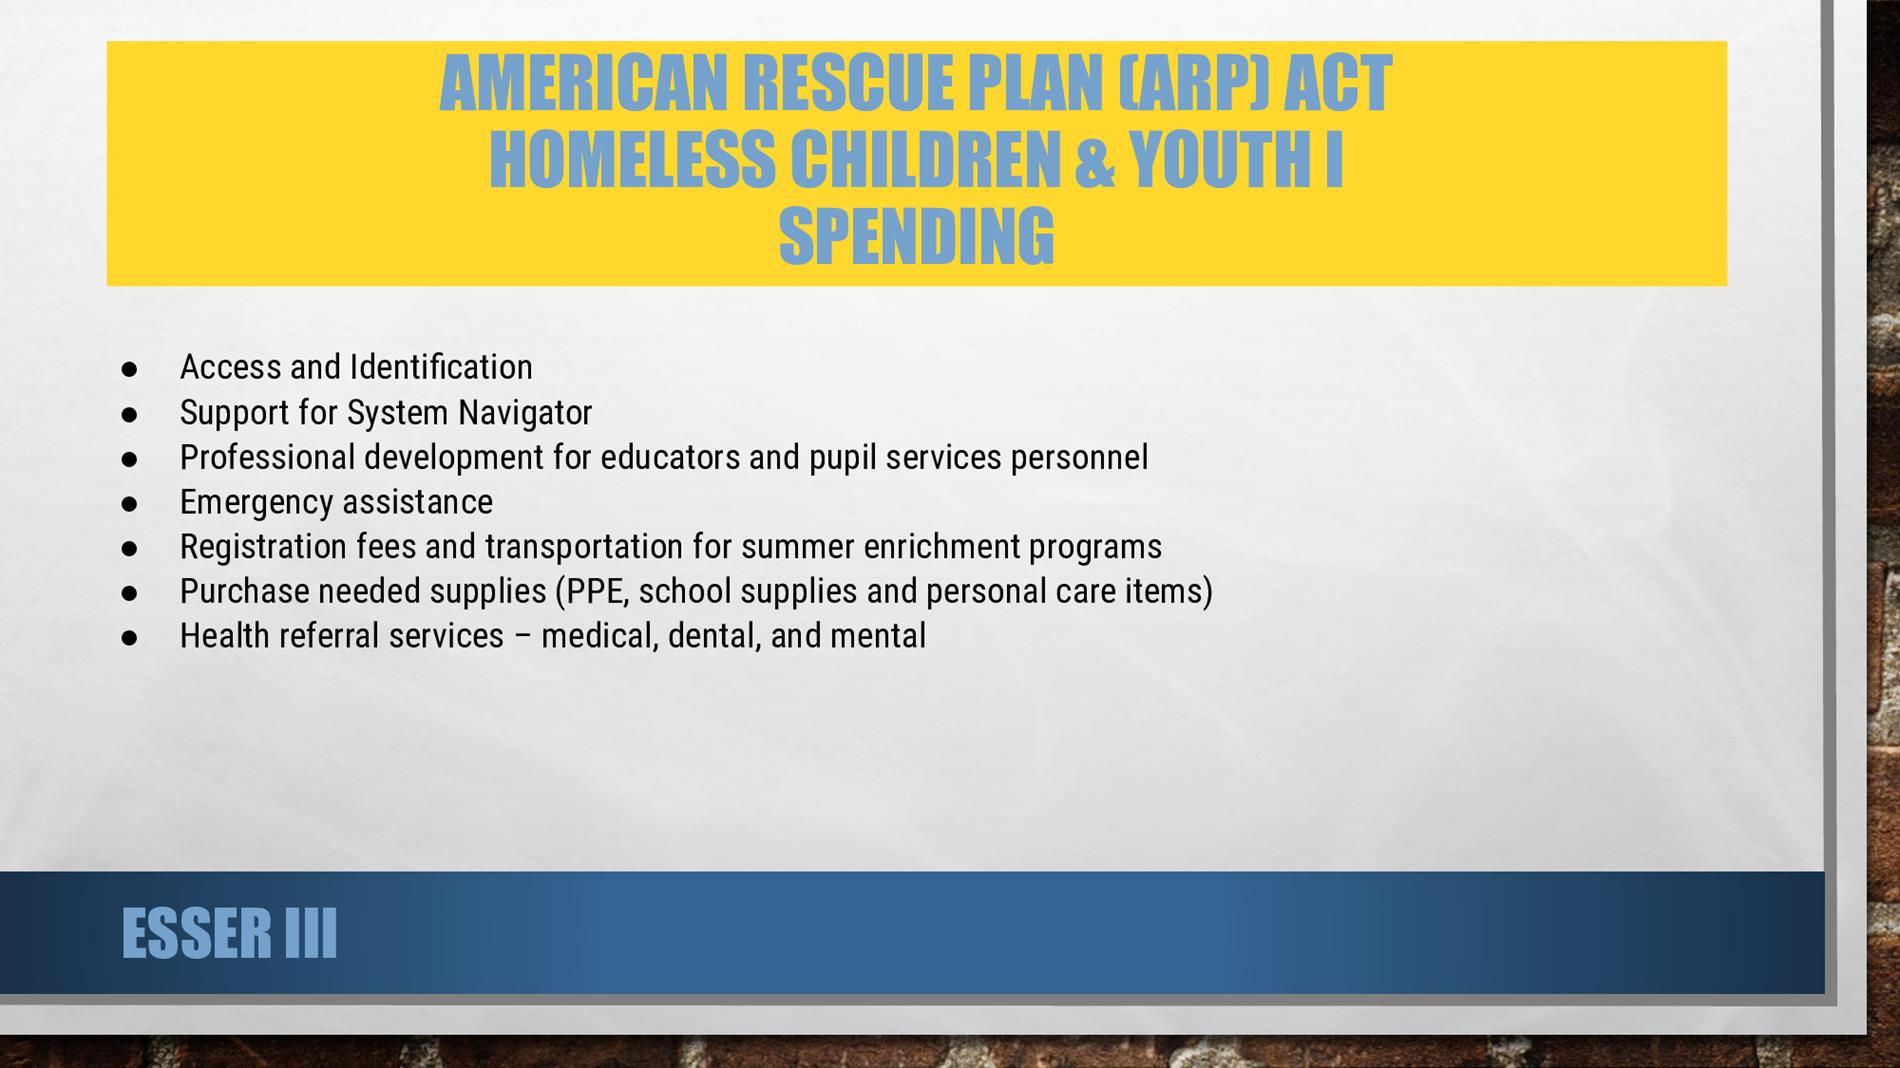 AMERICAN RESCUE PLAN (ARP) ACT HOMELESS CHILDREN & YOUTH I SPENDING